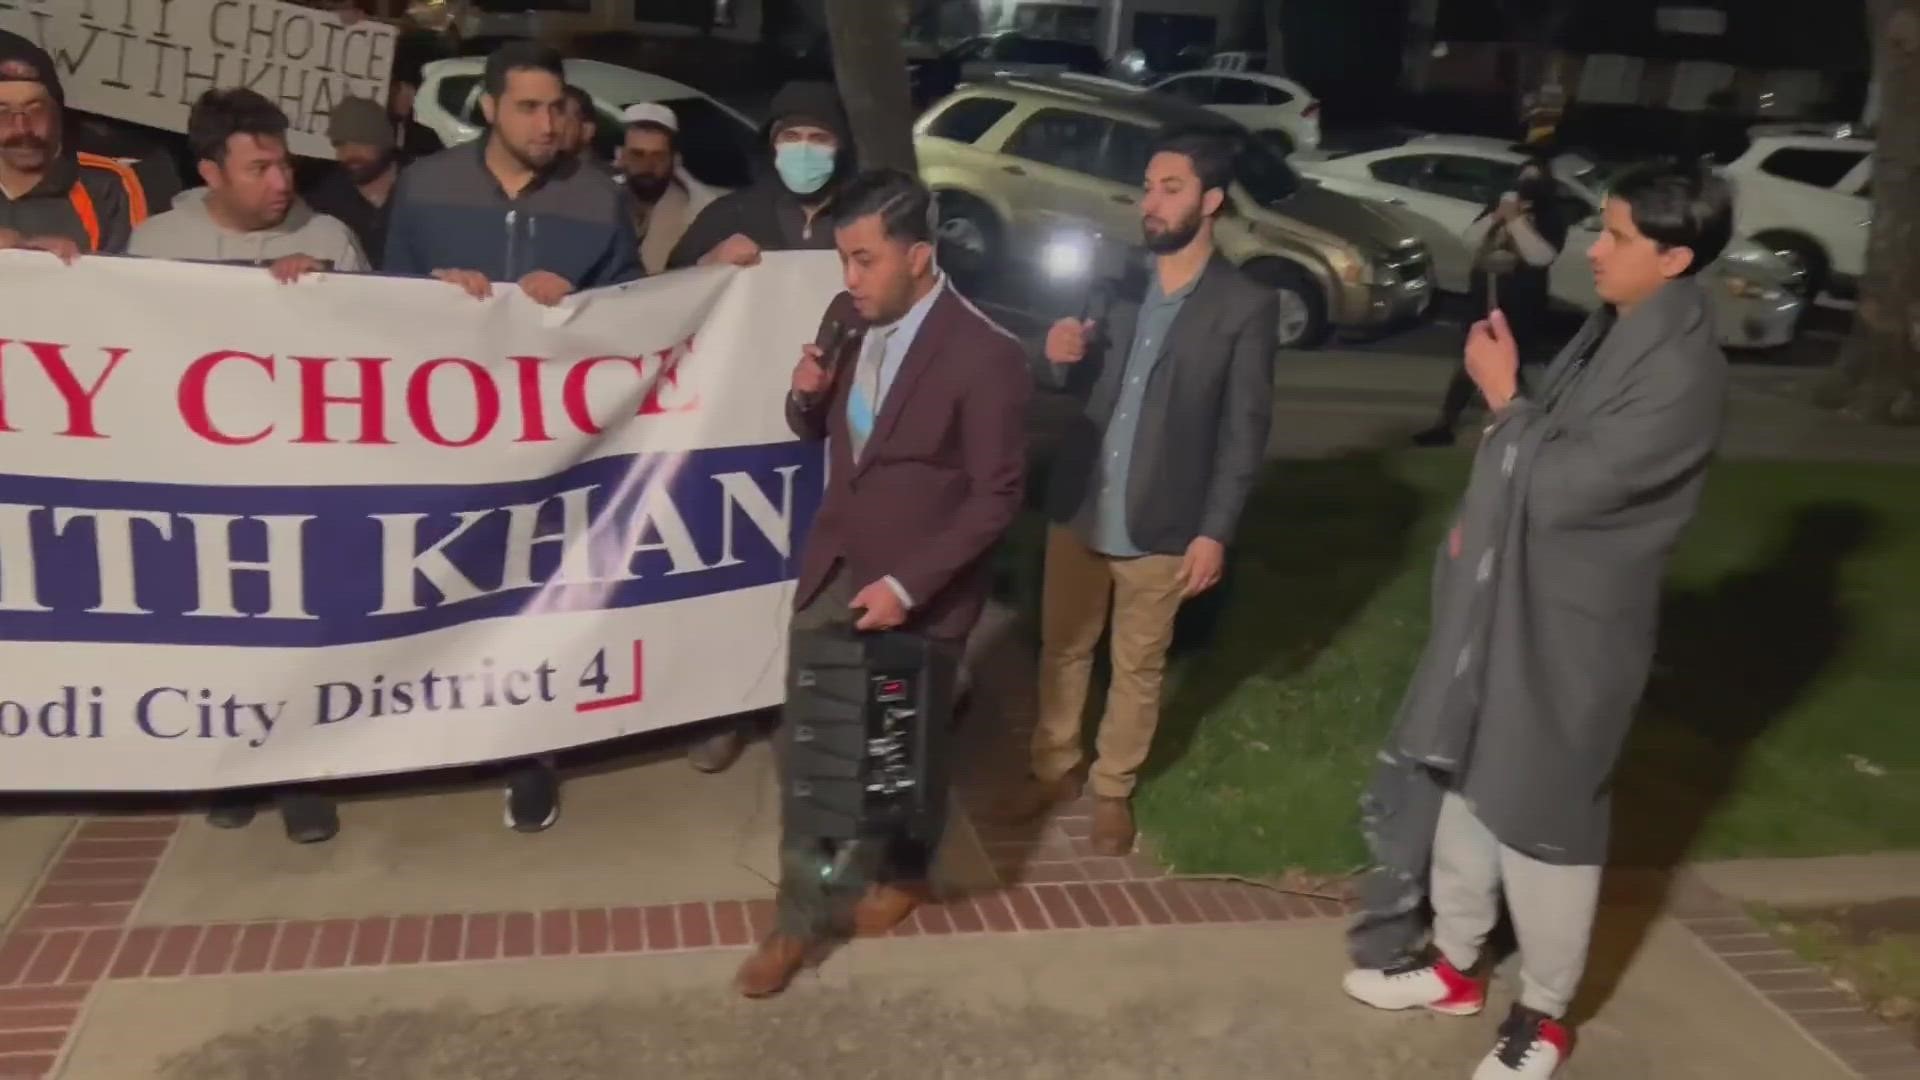 Shakir Khan took his protest to a Lodi City Council meeting as he faces election crime charges.